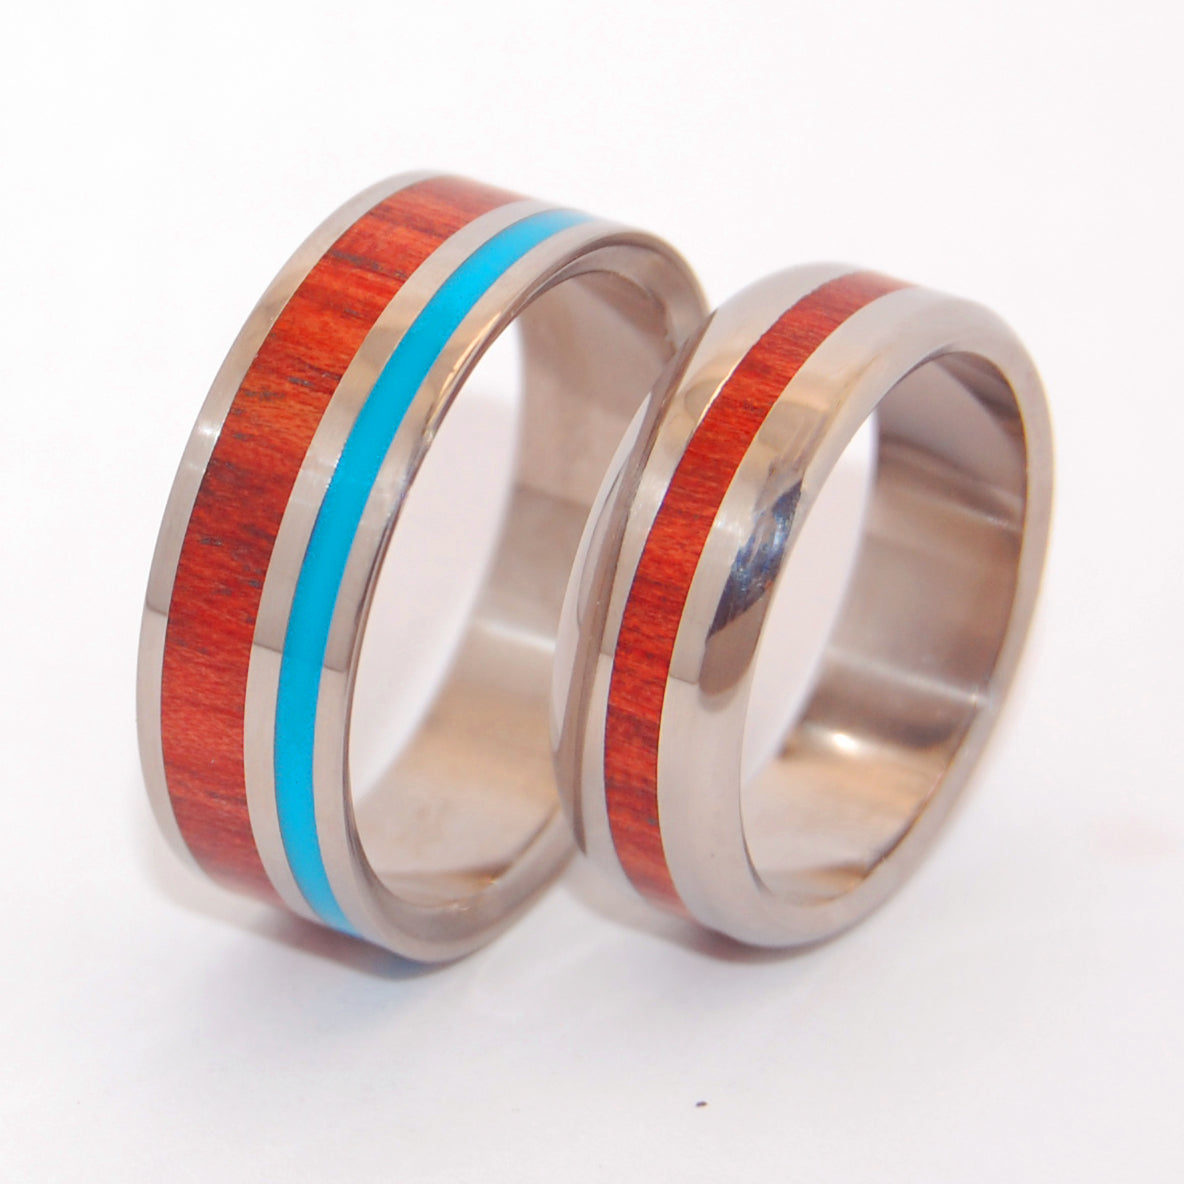 SHORE UP MY HEART | Blood Wood & Turquoise Resin Wedding Rings Set - Minter and Richter Designs